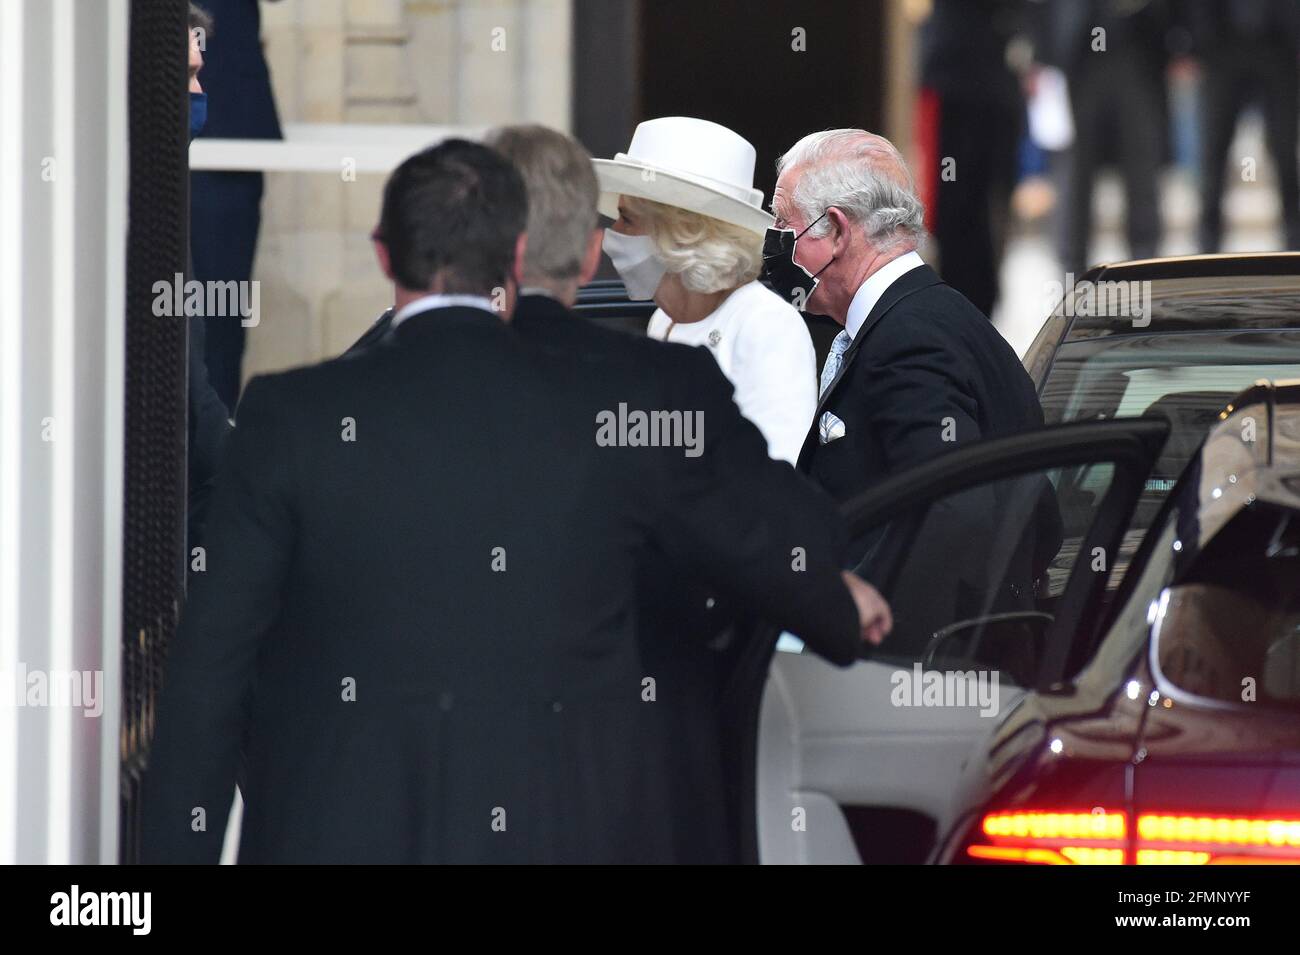 Westminster London, UK. 11th May, 2021. Prince Charles and Camilla Duchess of Cornwall arrive at Westminster where Queen Elizabeth ll will deliver the Queen's Speech in the House of Lords to mark the State opening of Parliament. Credit: MARTIN DALTON/Alamy Live News Stock Photo